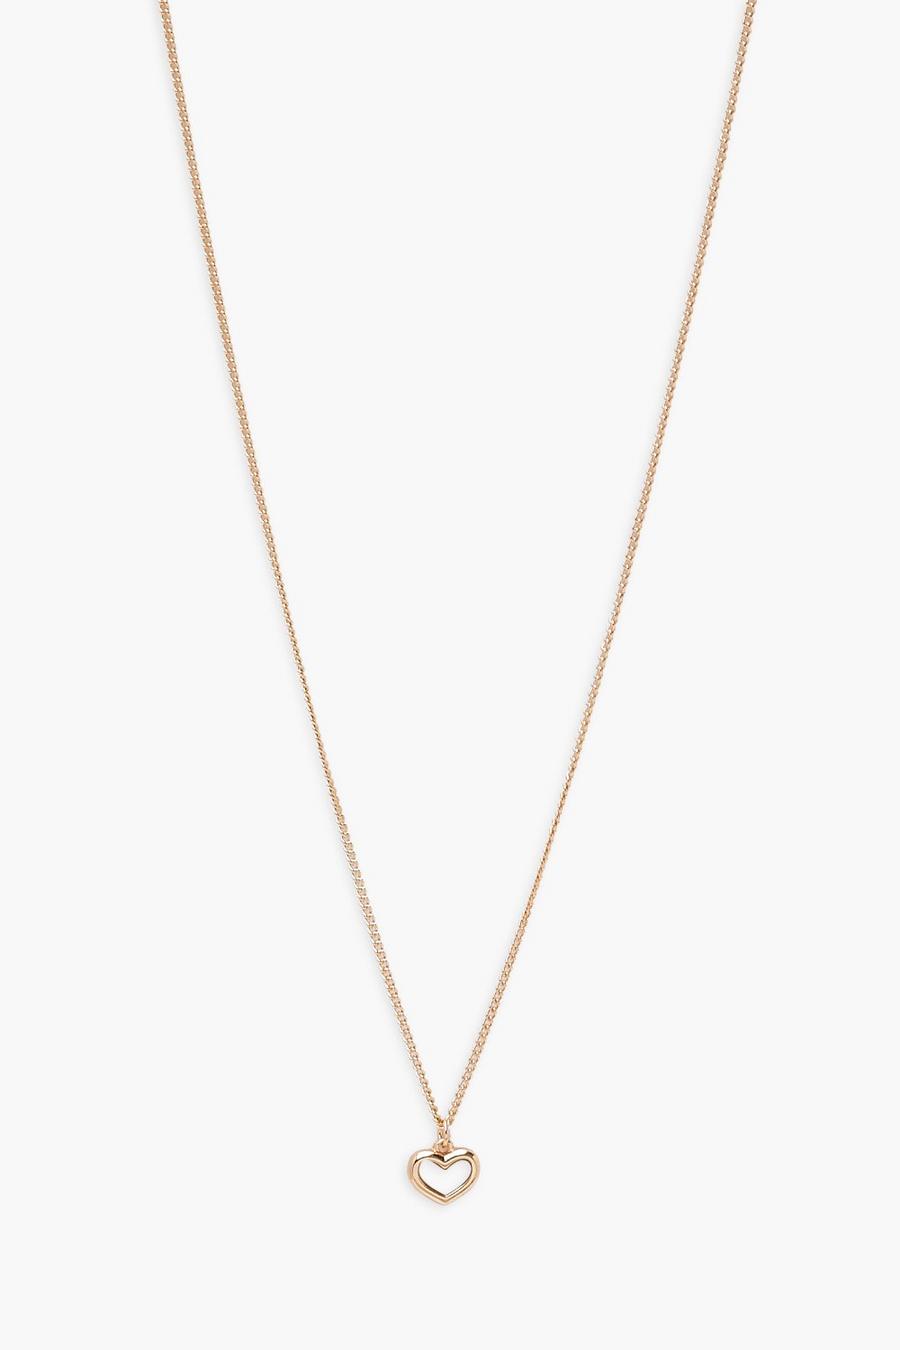 Gold metallic Simple Small Heart Chain Necklace